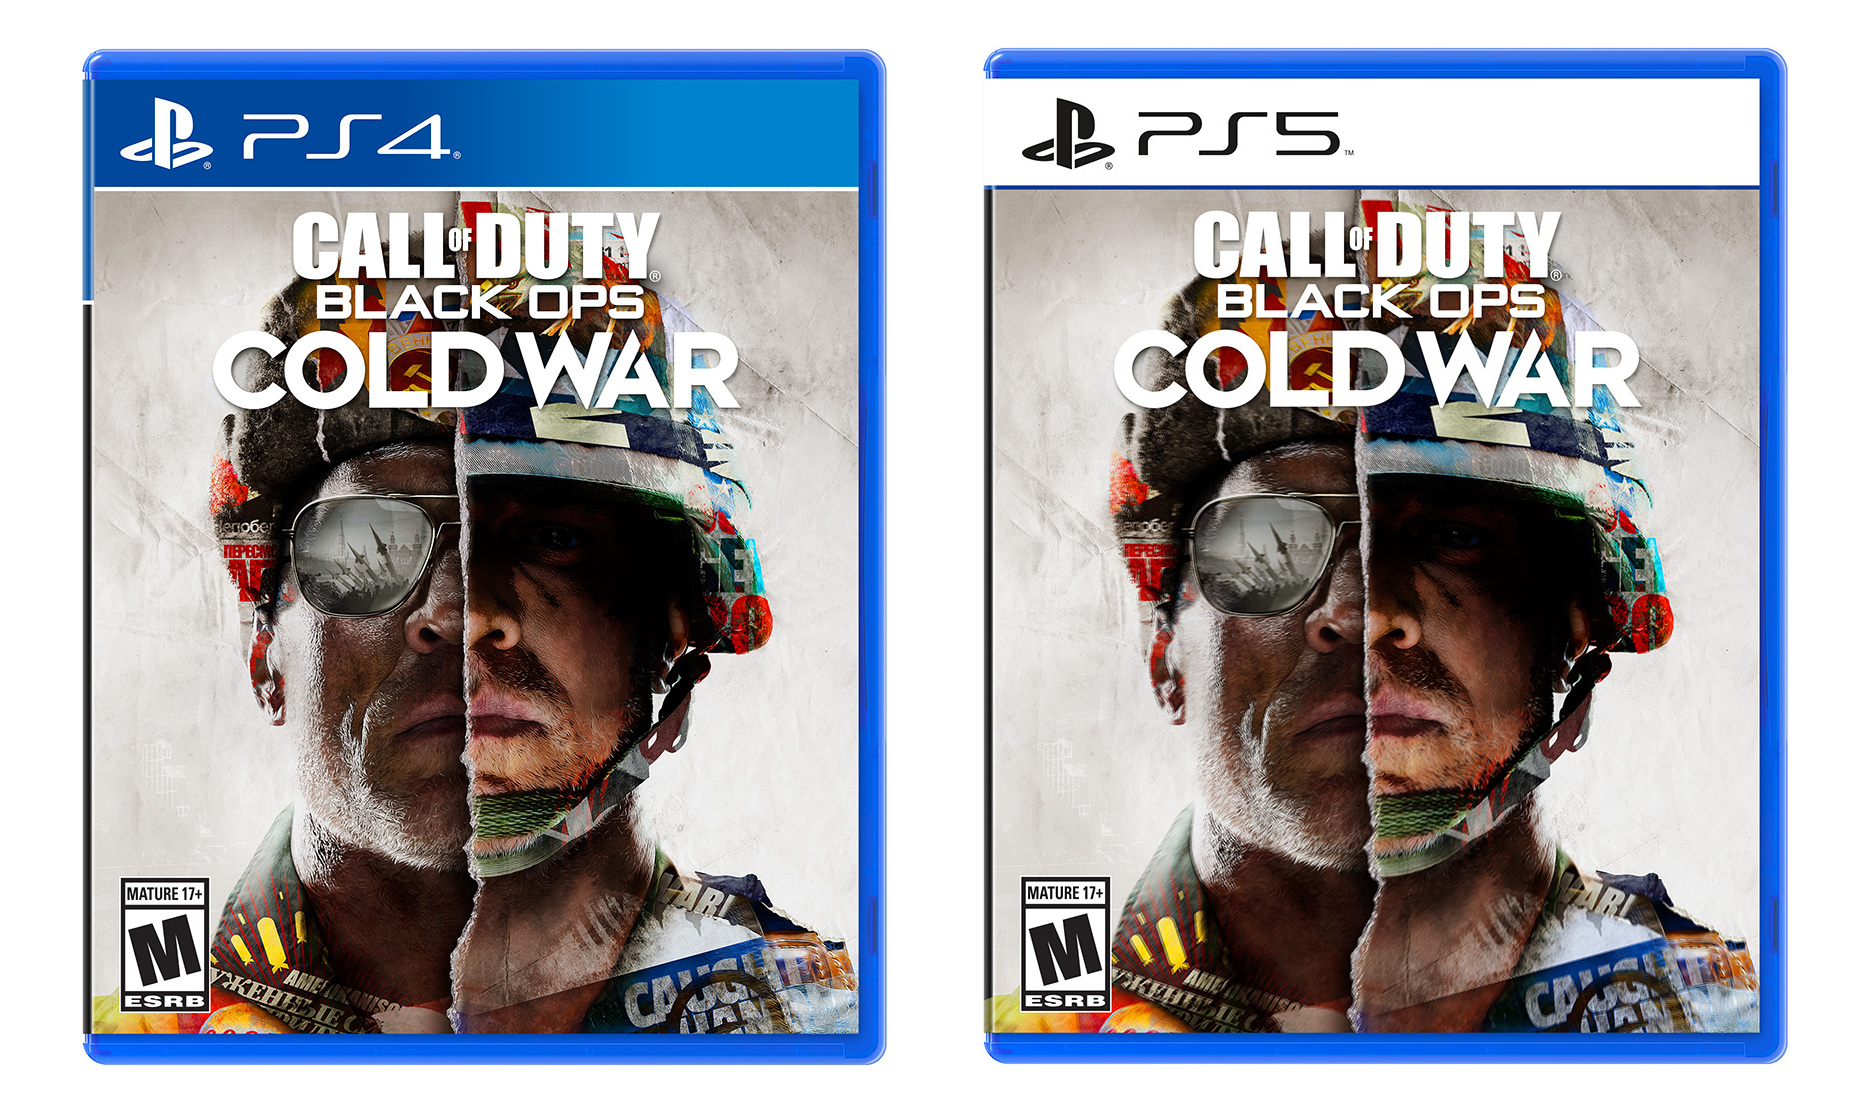 You cannot upgrade the physical Xbox One version of Call of Duty: Black Ops Cold War to Xbox Series X